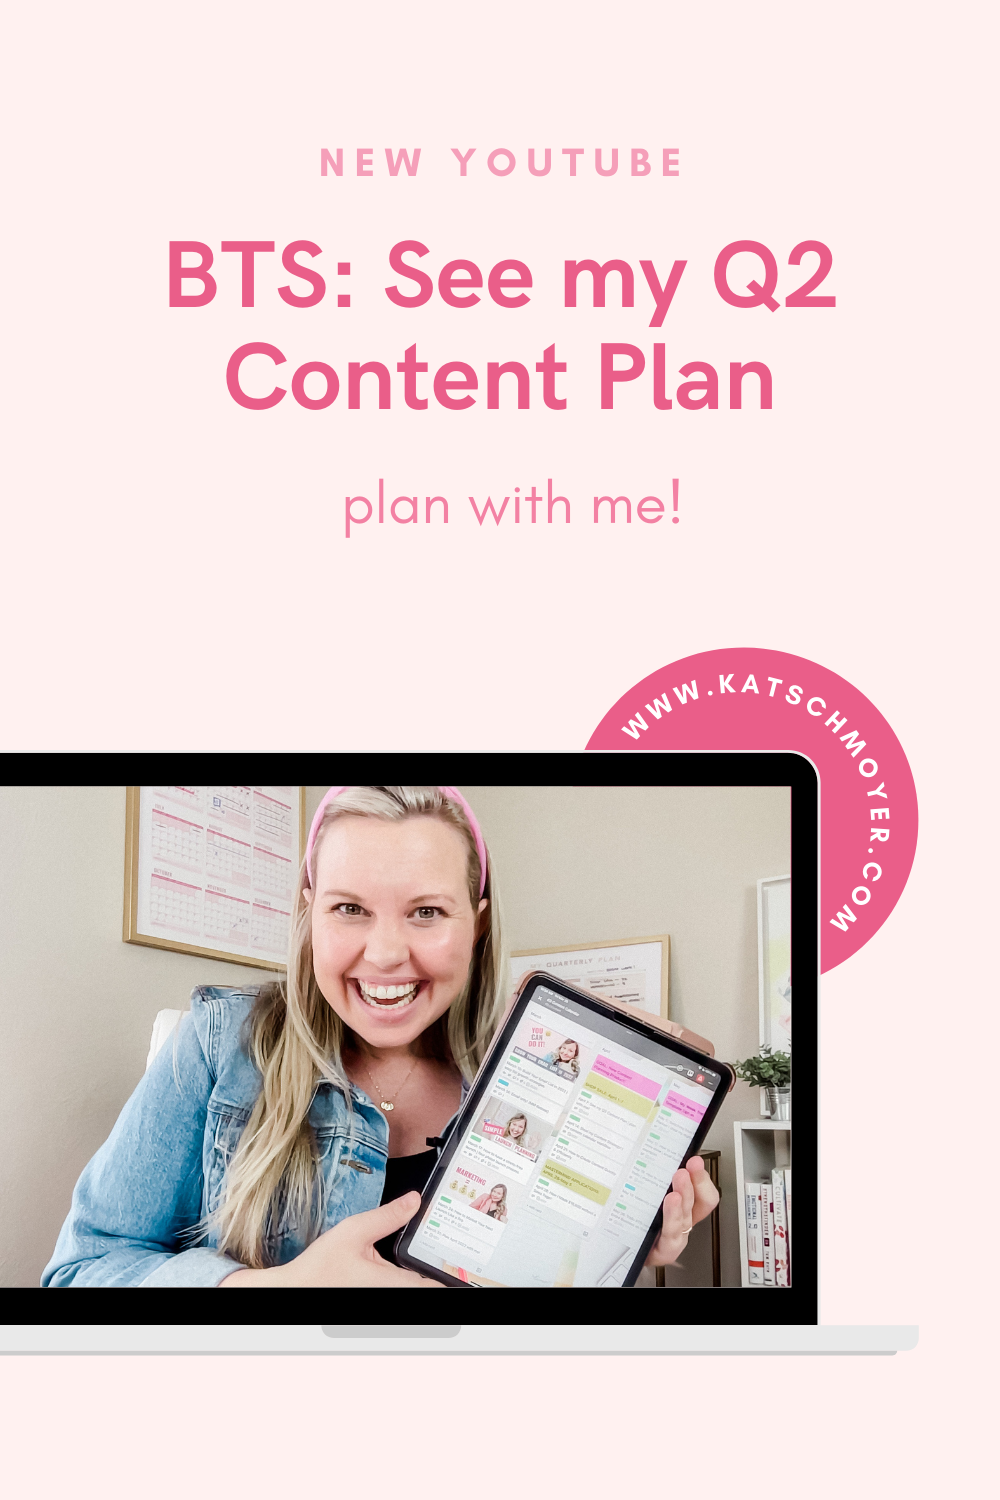 BTS: See my Q2 Content Plan